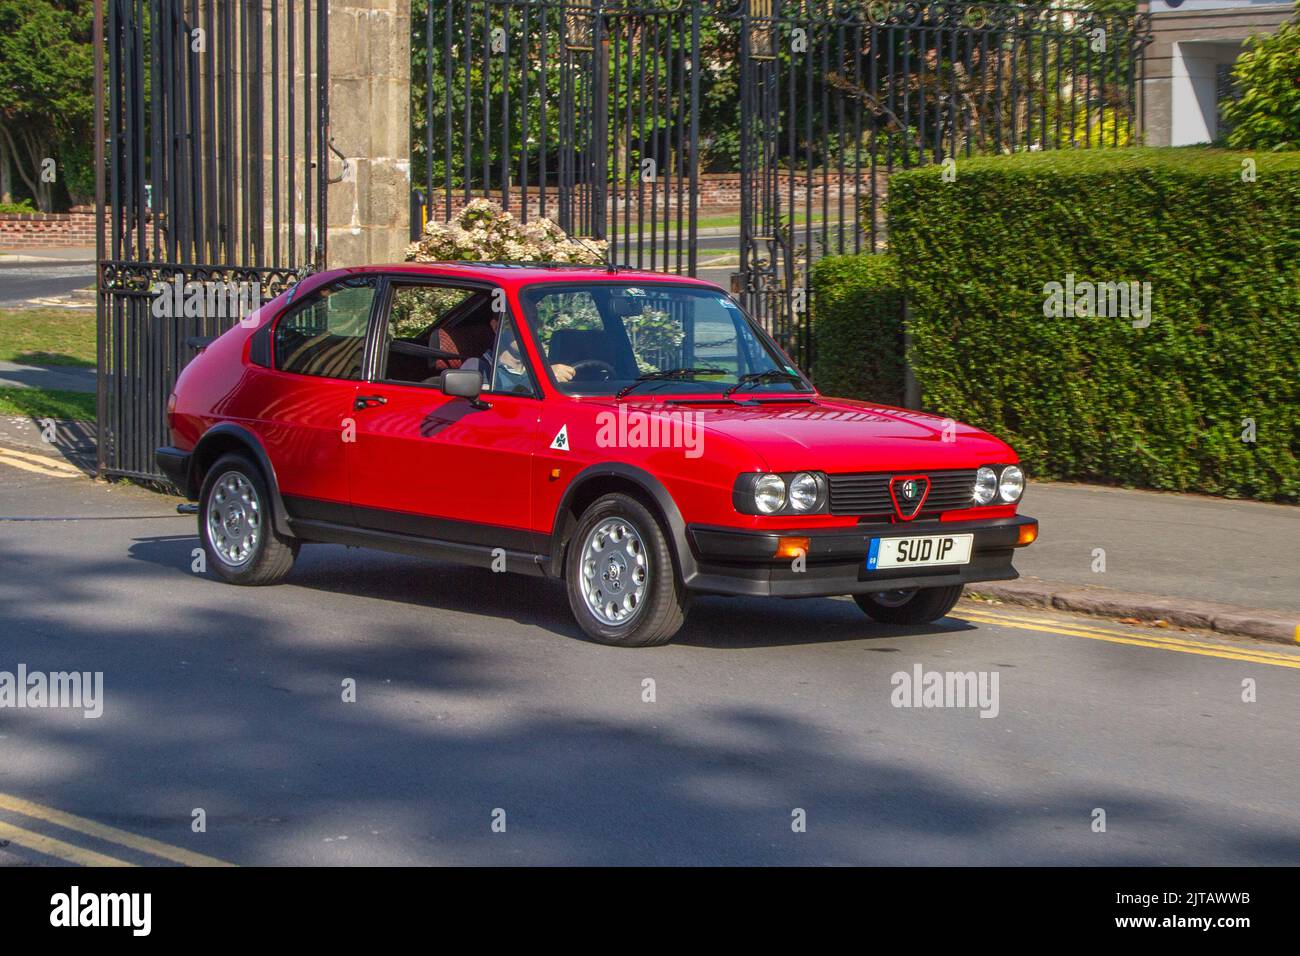 1983 80s eighties Red ALFA ROMEO 1490cc Petrol Italian sports car; Cars arriving at the annual Stanley Park Classic Car Show in the park gardens. Stanley Park classics yesteryear Motor Show Hosted By Blackpool Vintage Vehicle Preservation Group, UK. Stock Photo